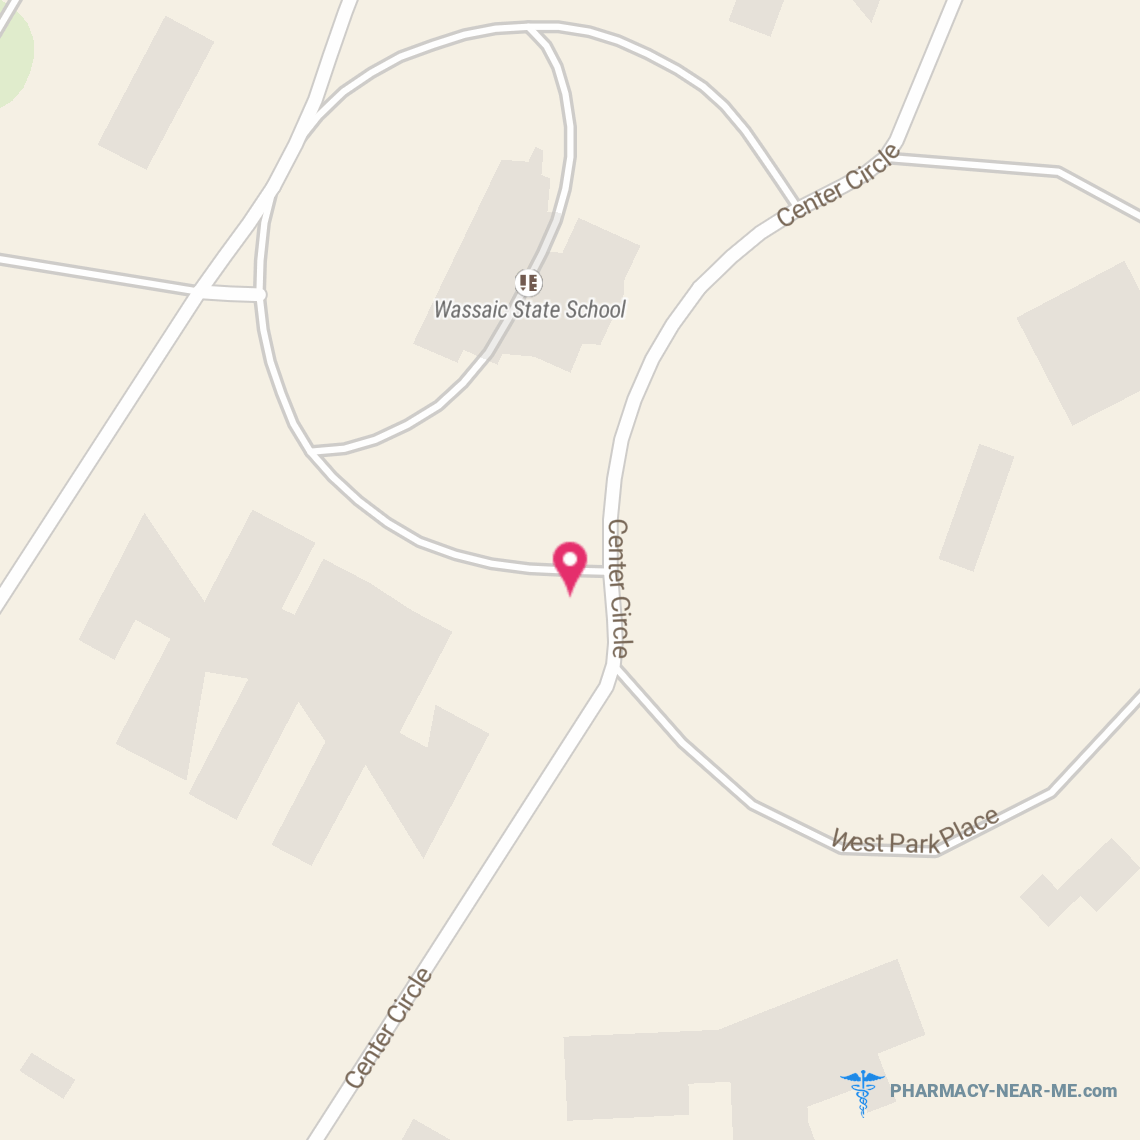 NEIGHBORCARE-TACONIC - Pharmacy Hours, Phone, Reviews & Information: 26 Center Circle, Dover Plains, New York 12522, United States